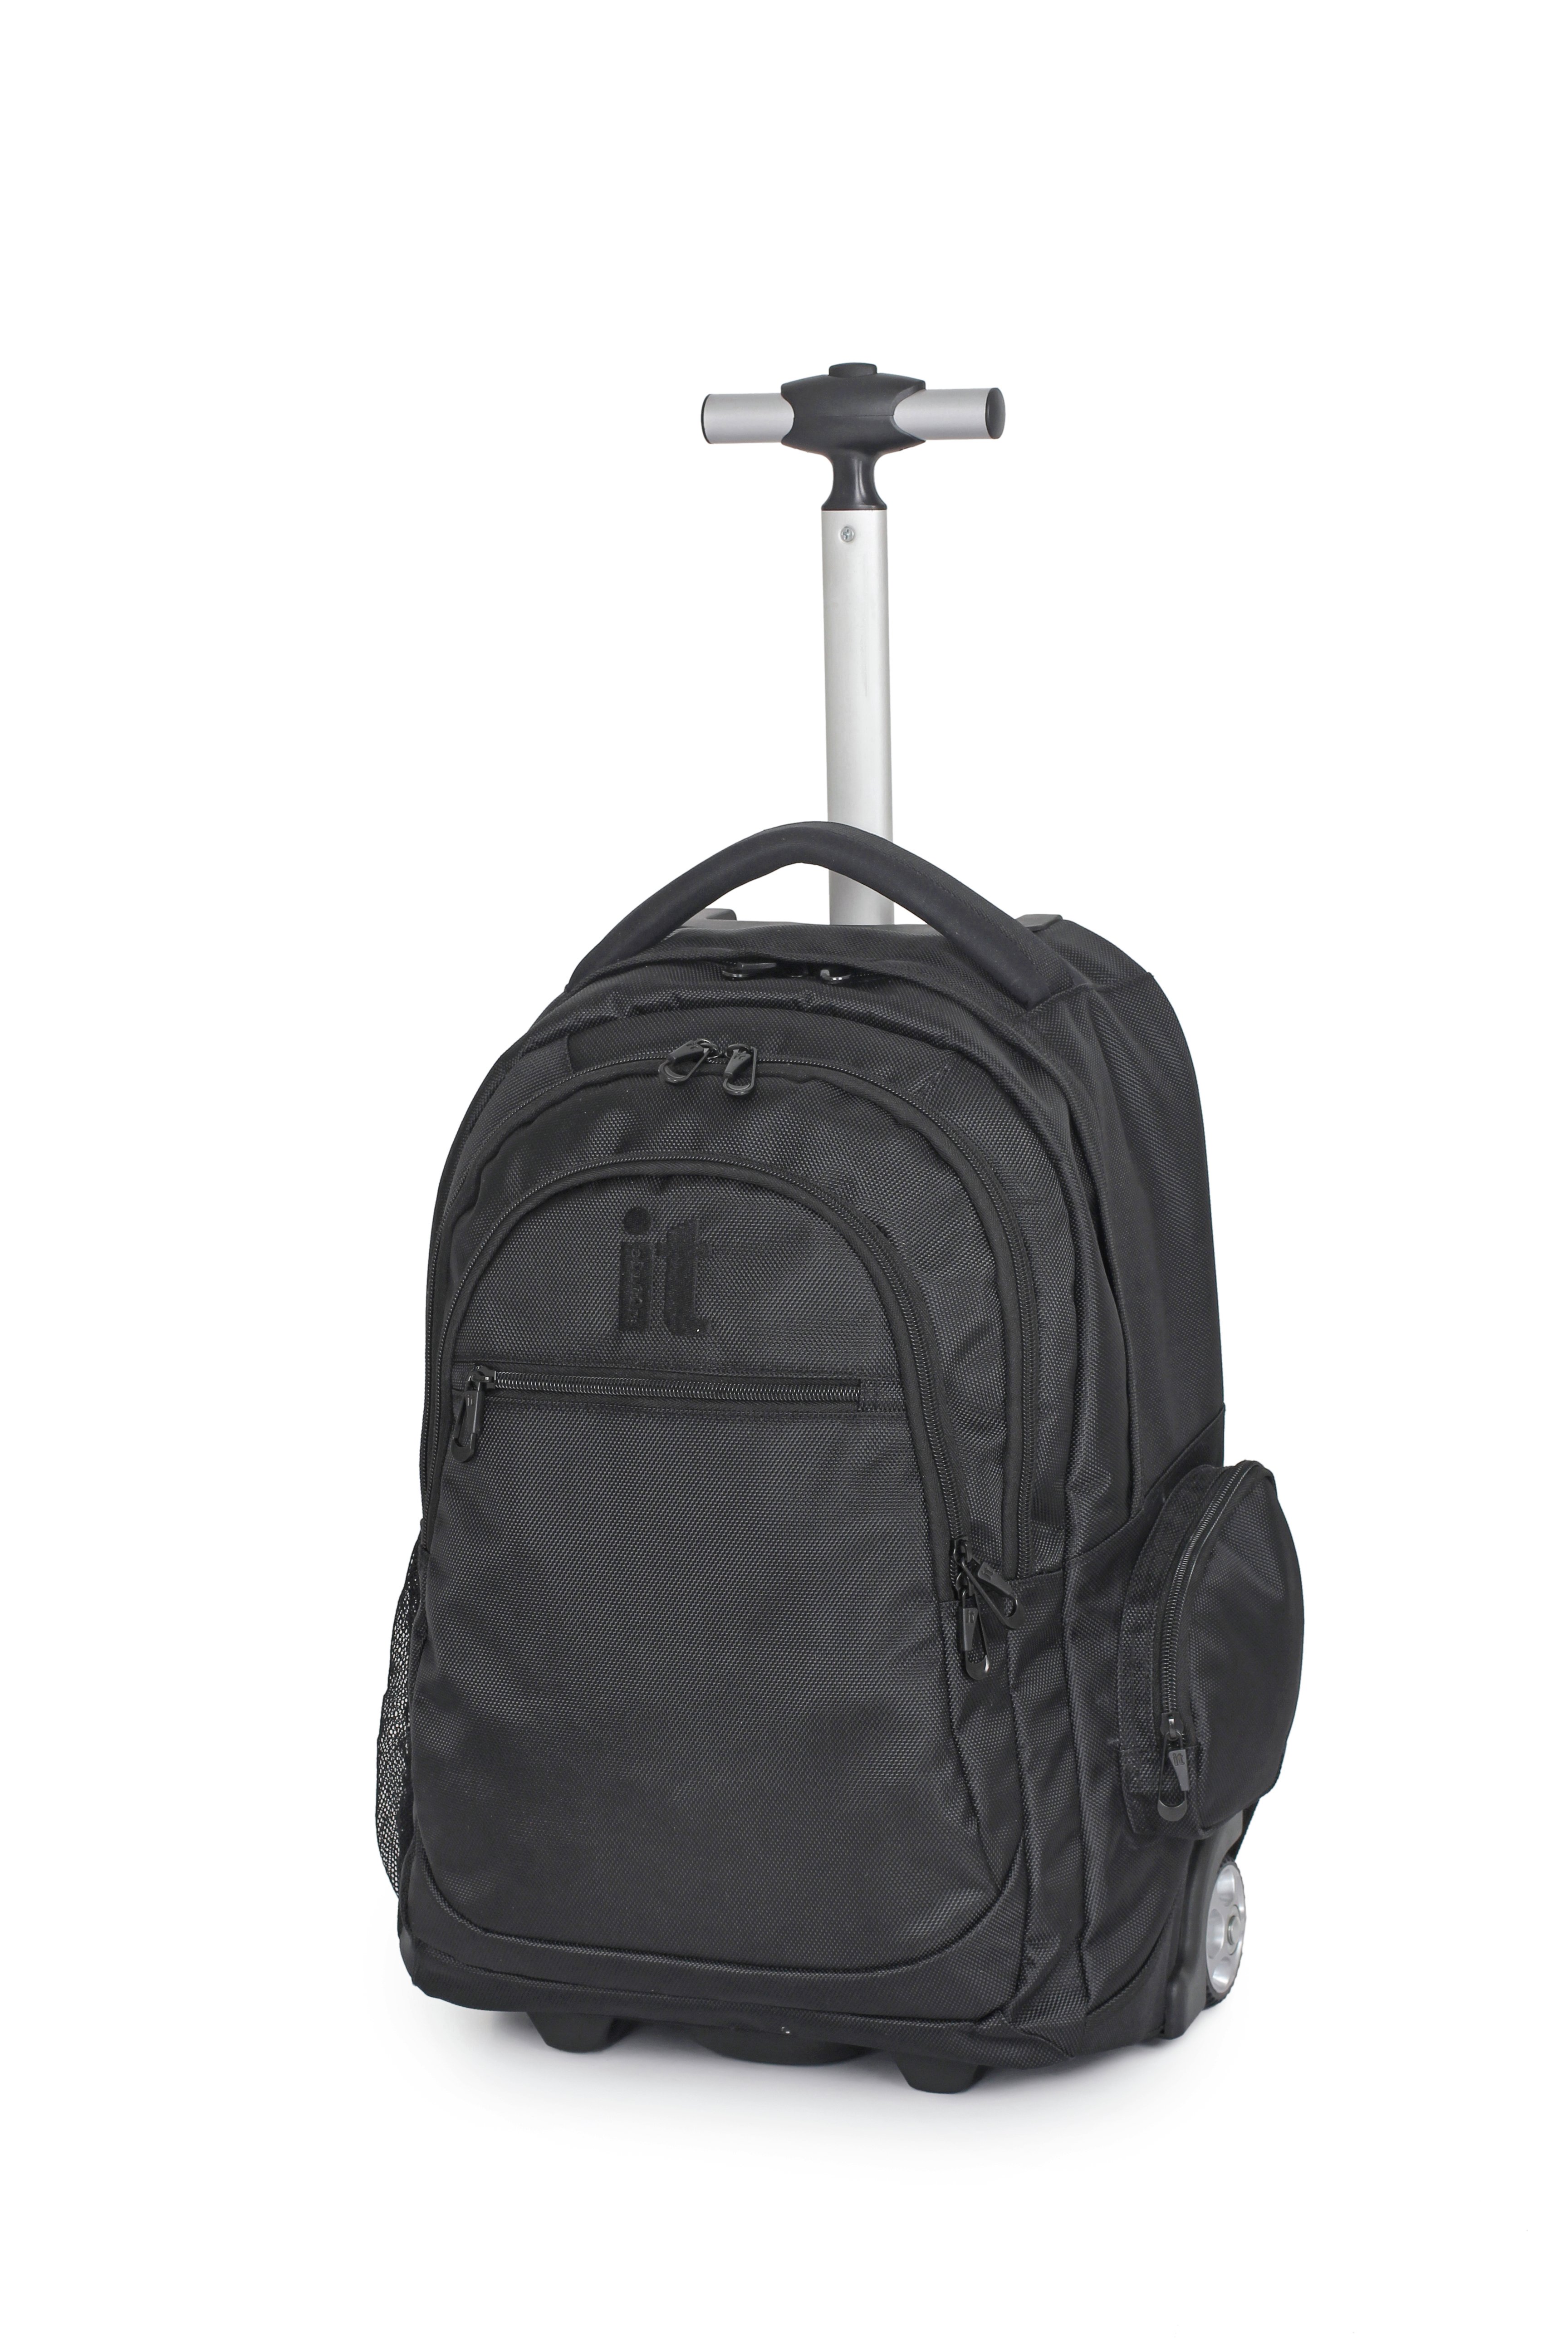 travel backpack with wheels uk